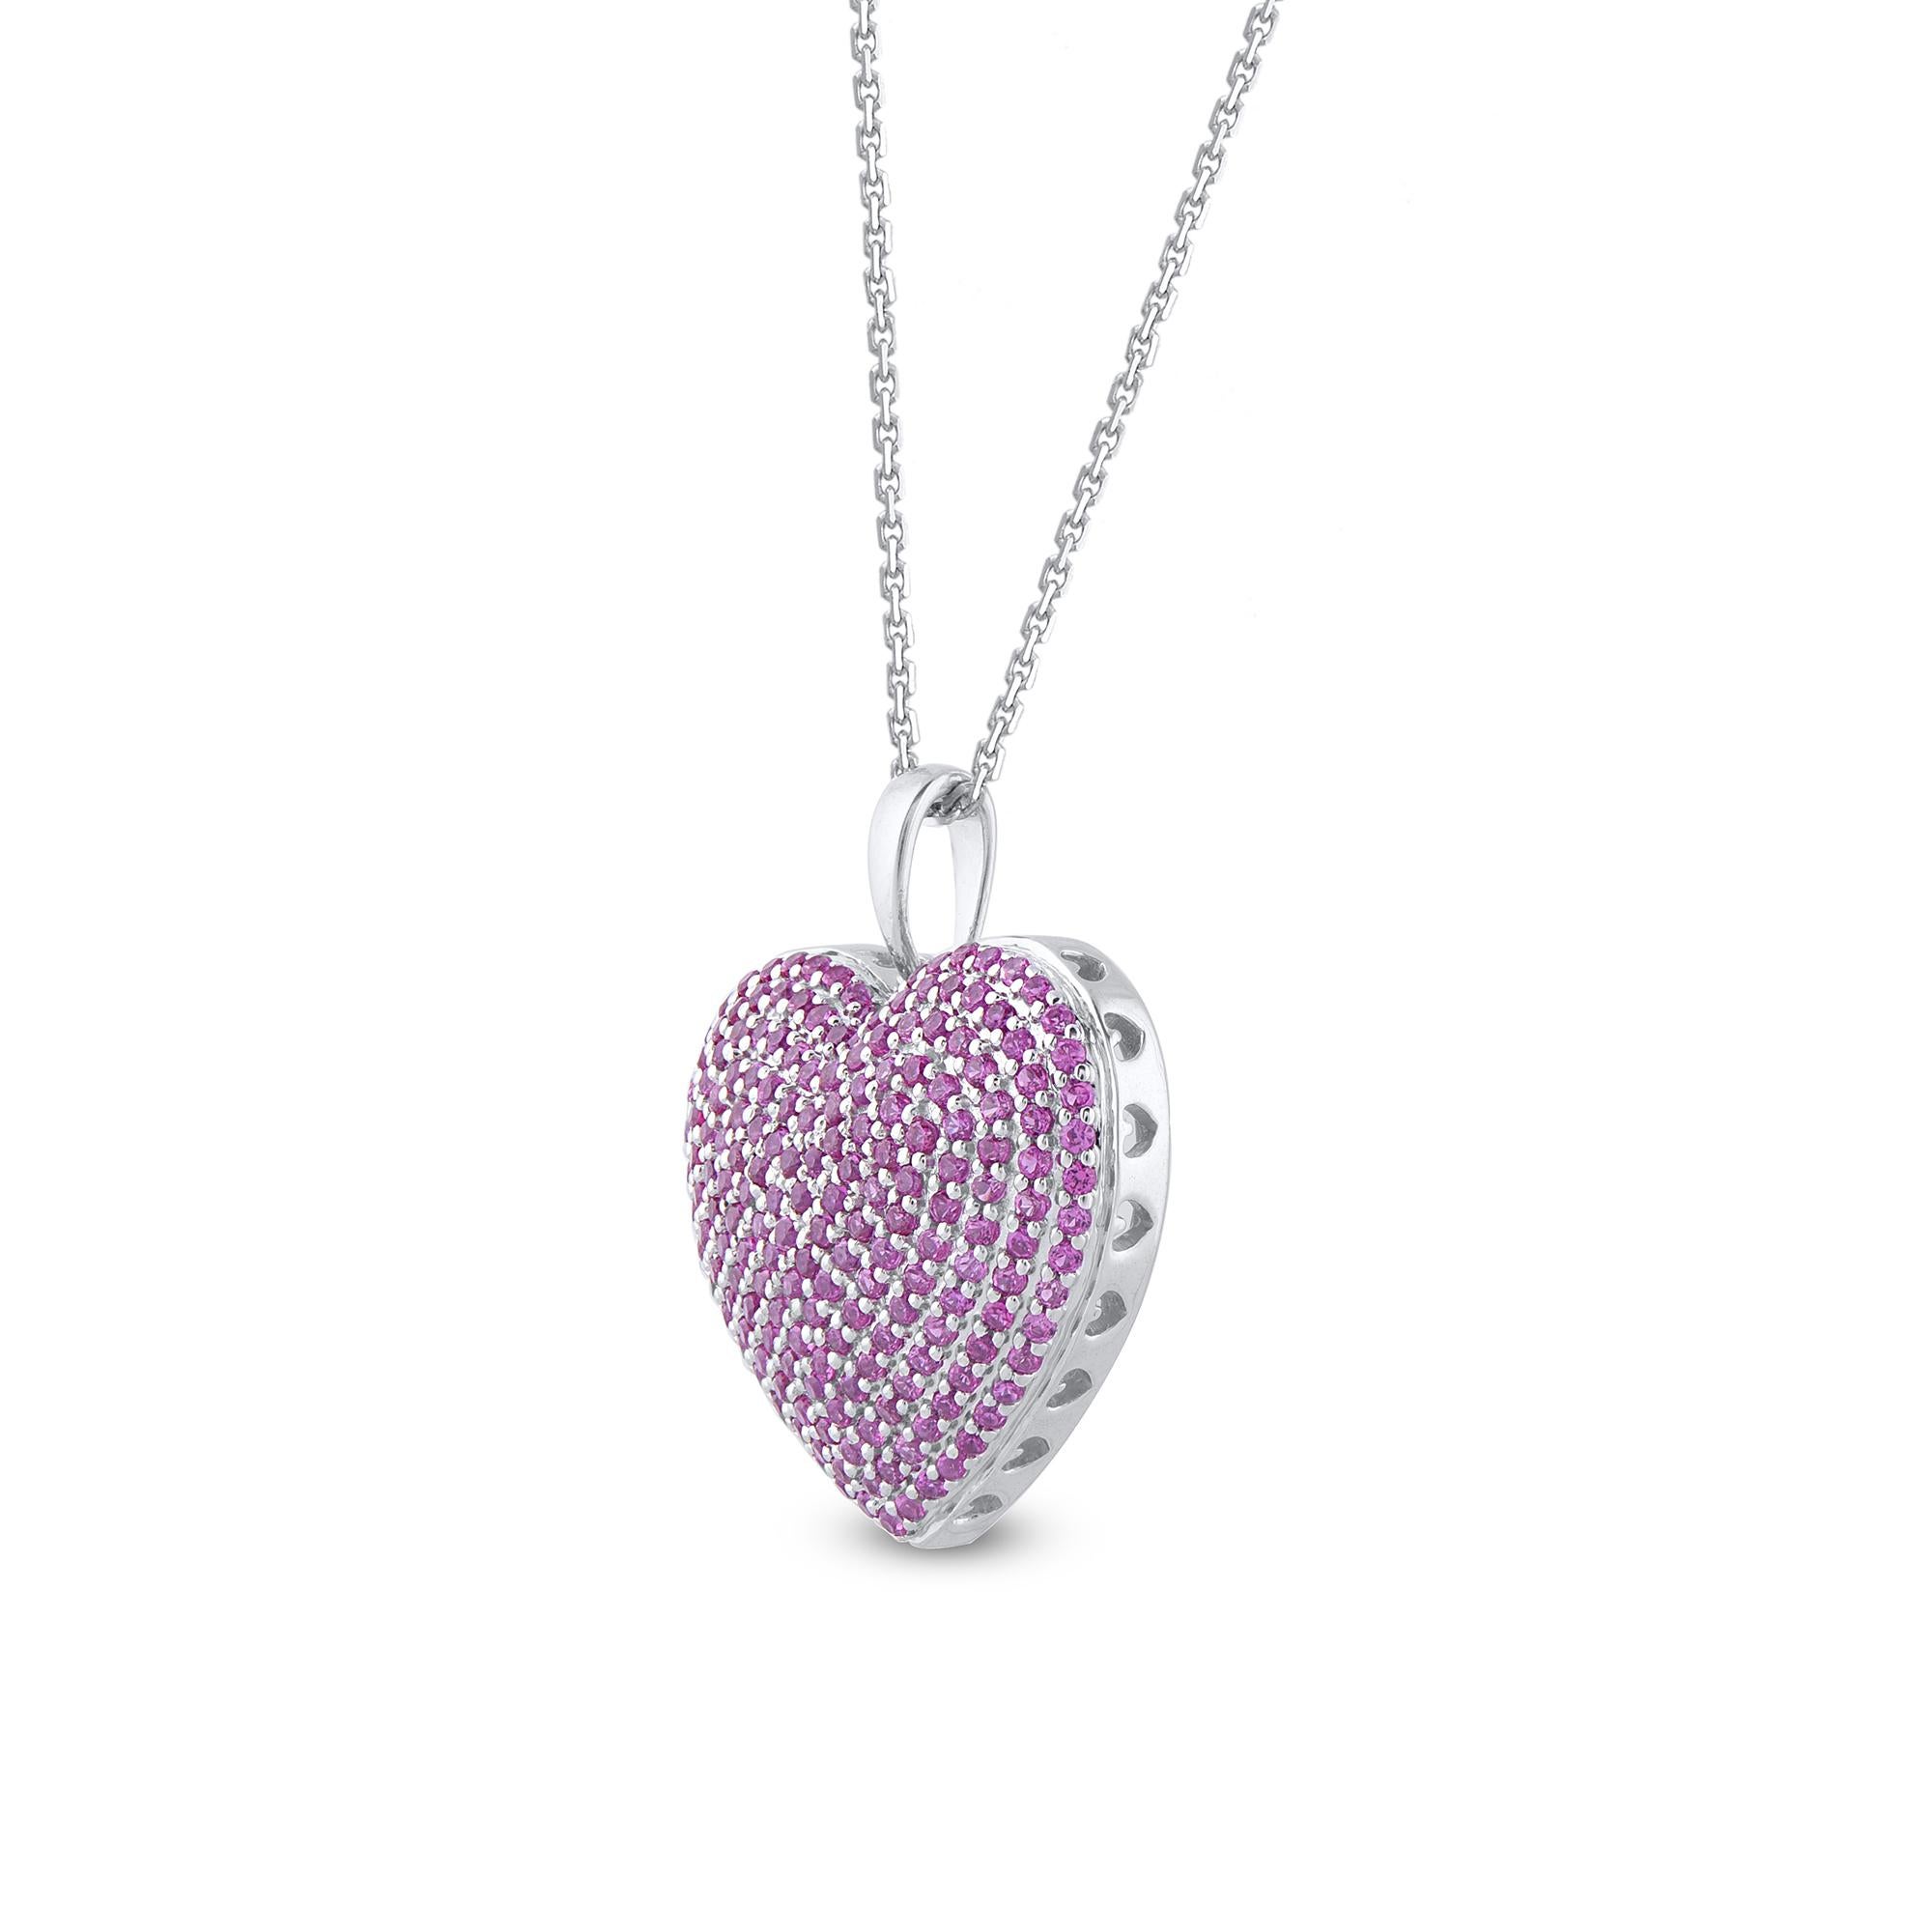 Bring charm to your look with this gemstone heart pendant. The pendant is crafted from 14 karat white gold and features 201 round pink sapphire set in prong setting and a high polish finish complete the brilliant sophistication of this head-turning